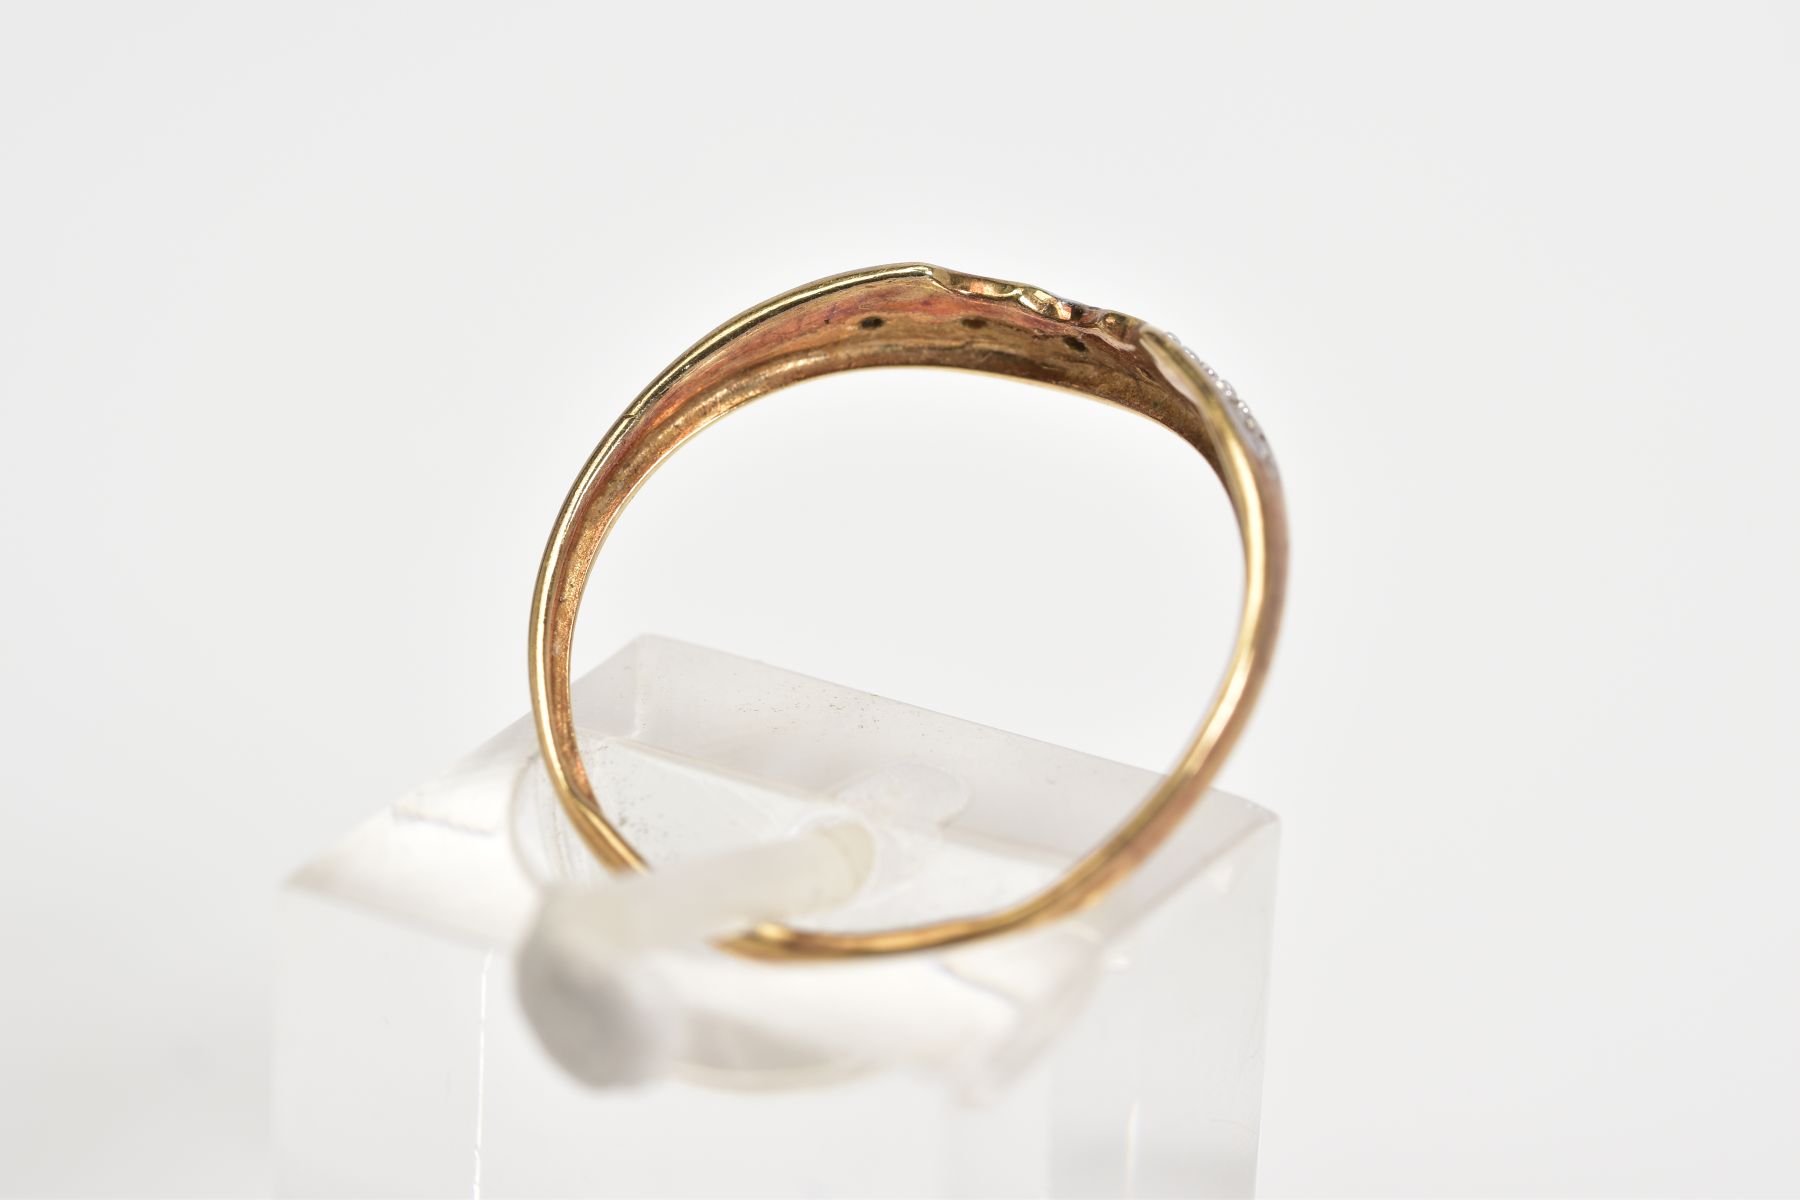 A 9CT GOLD DIAMOND RING, of V shape design, set with a row of single cut diamonds, to the plain - Image 3 of 3